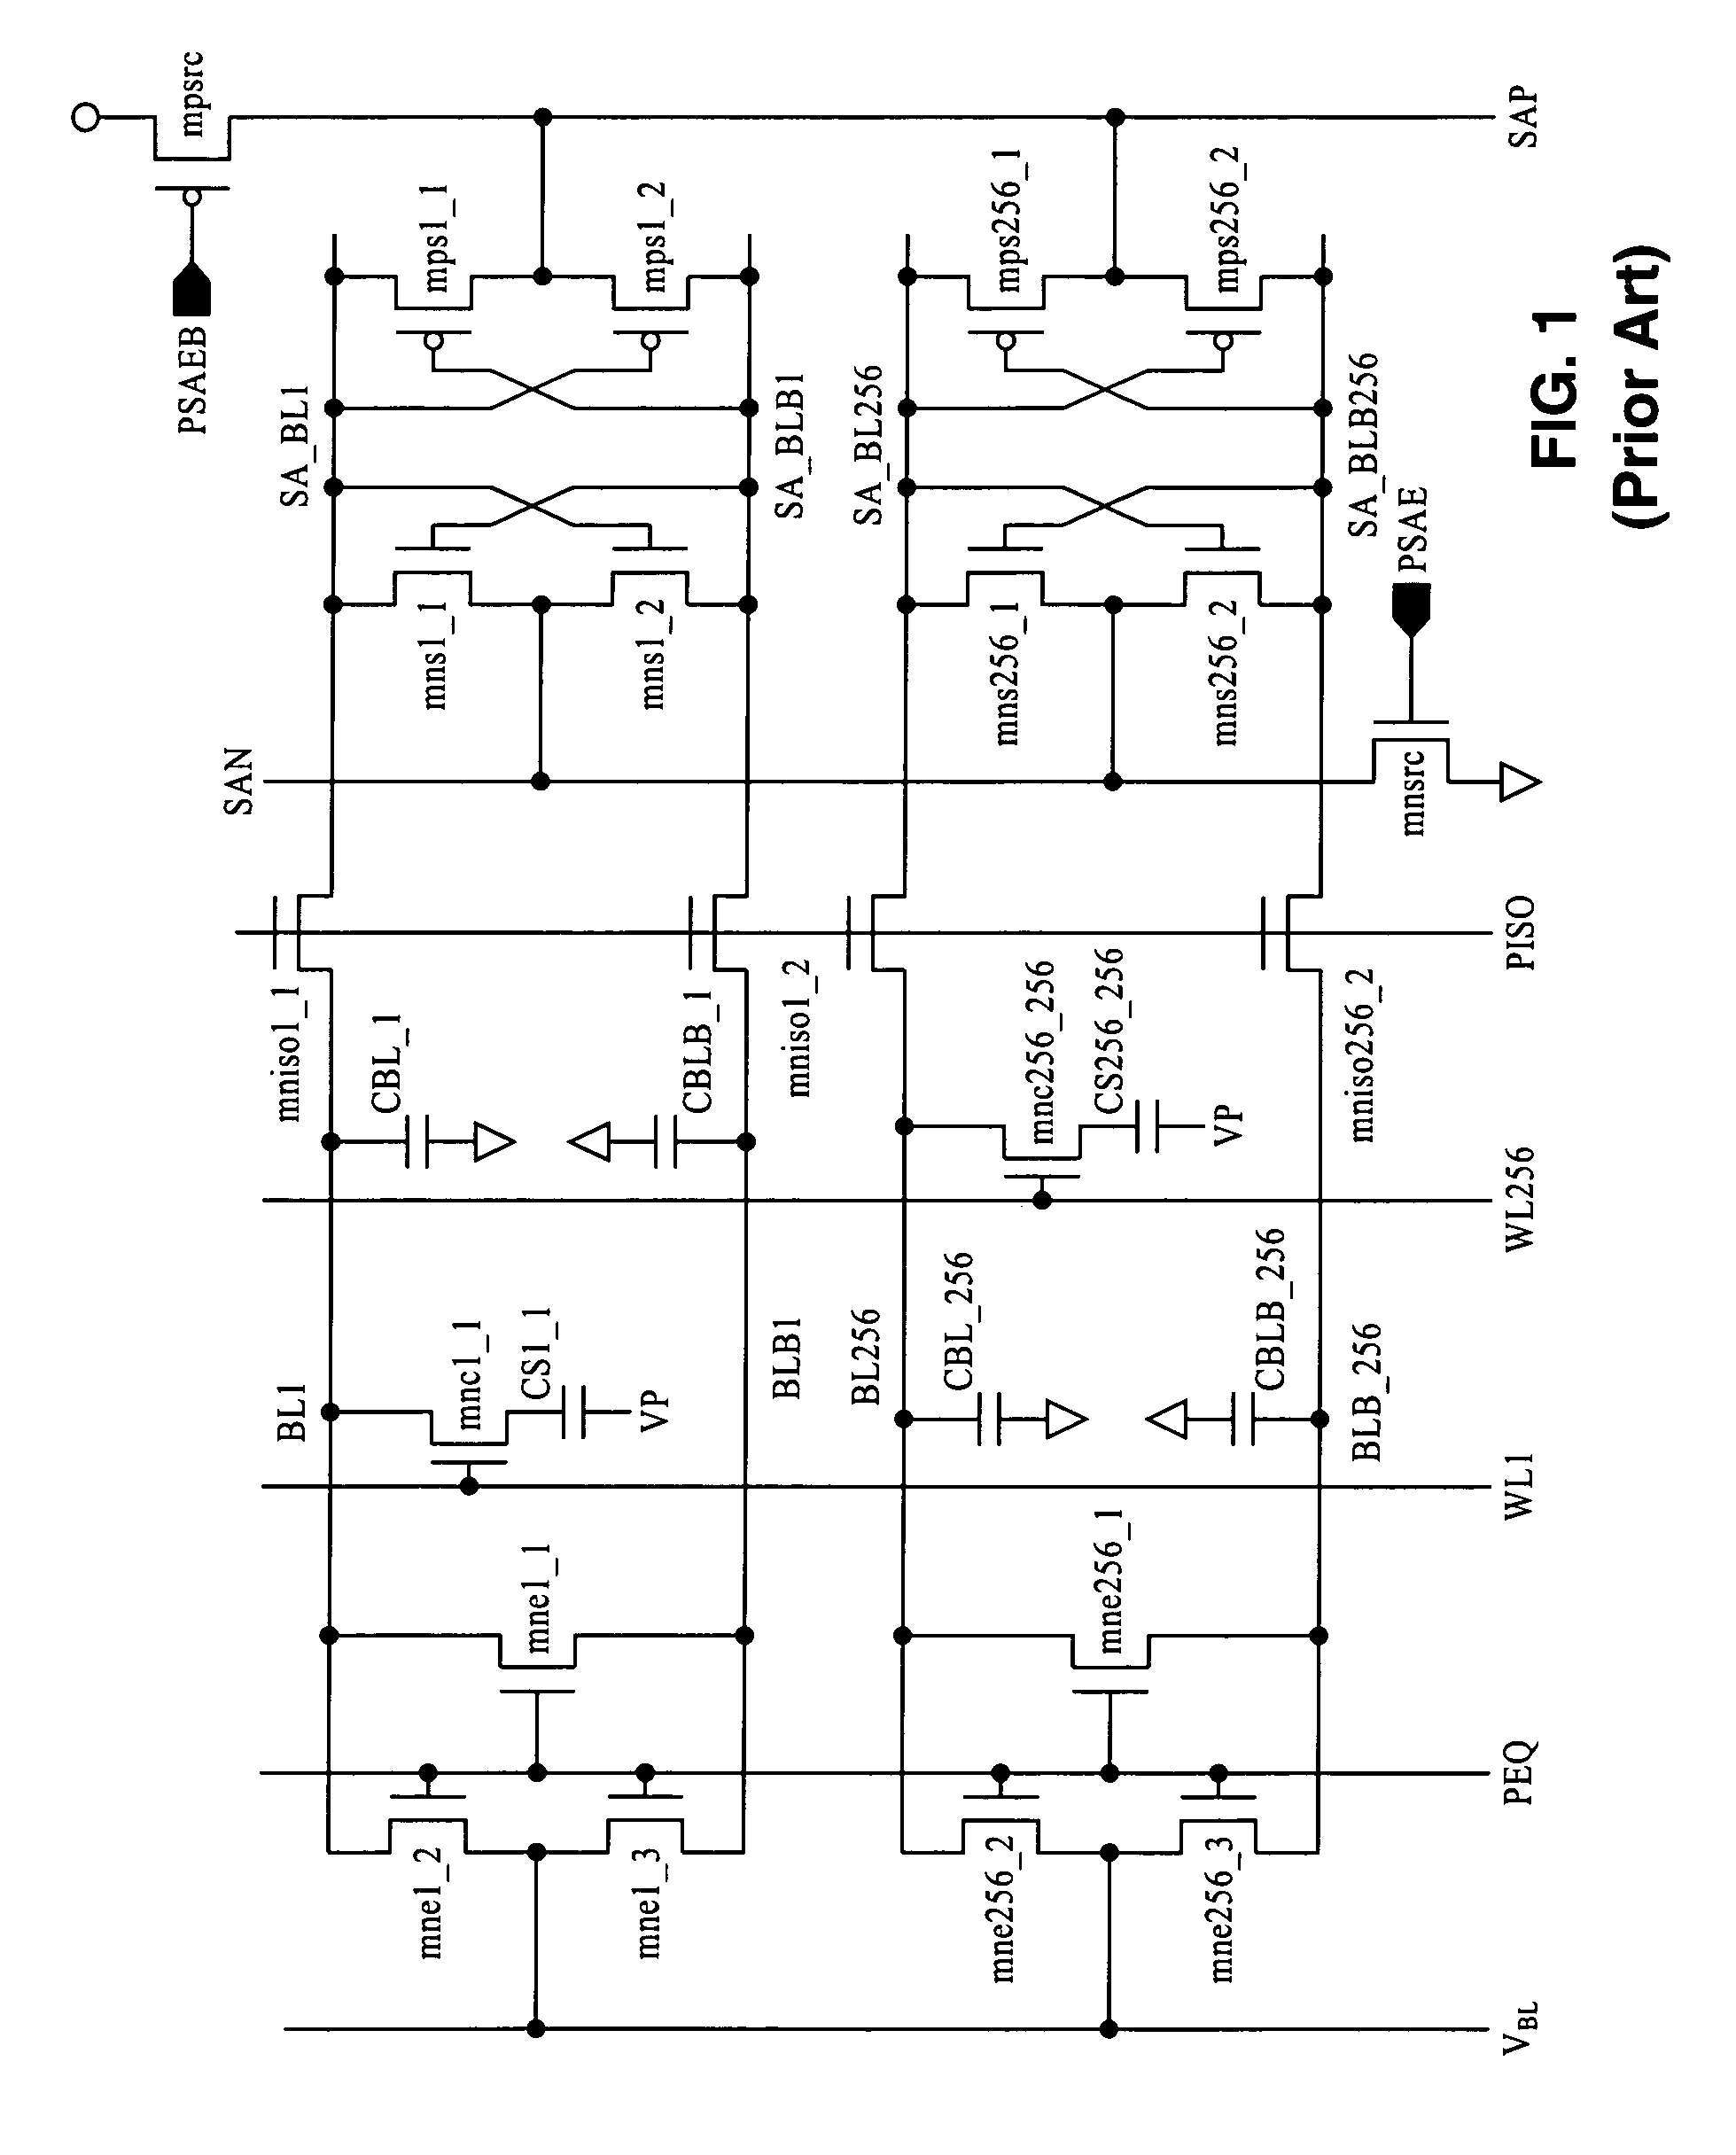 Low voltage operation DRAM control circuits